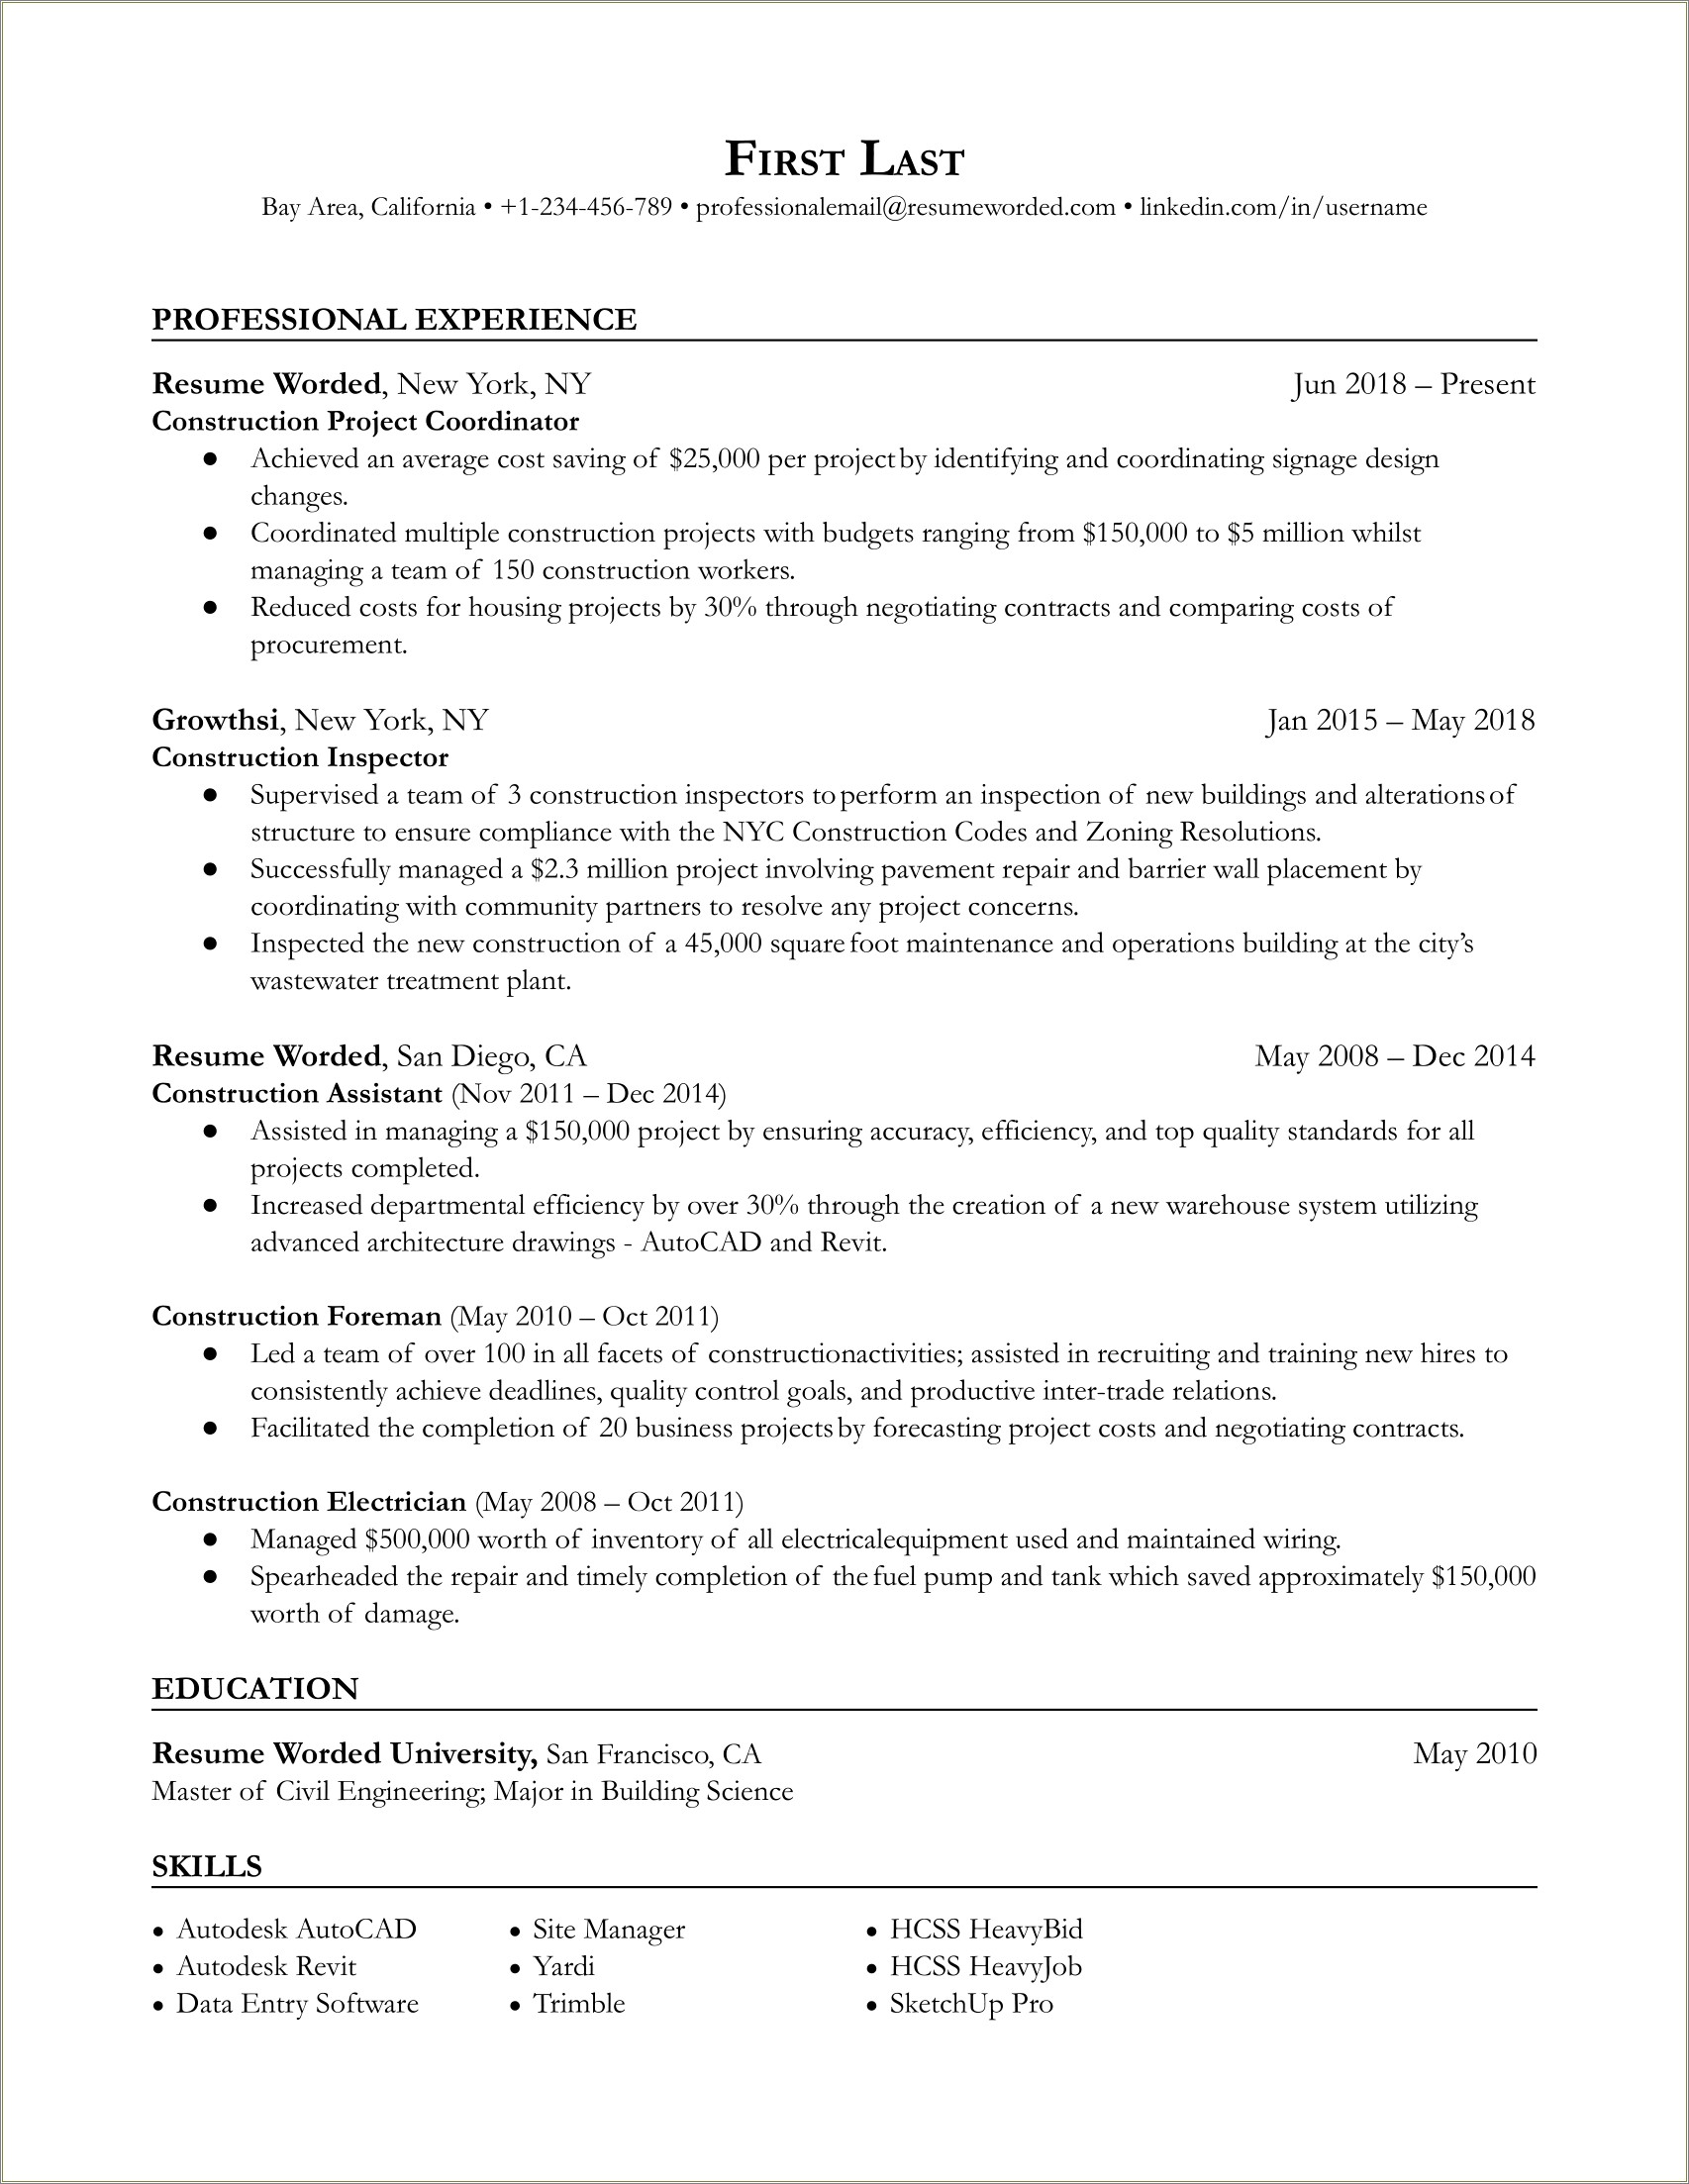 Resume Summary Examples For Construction Foreman